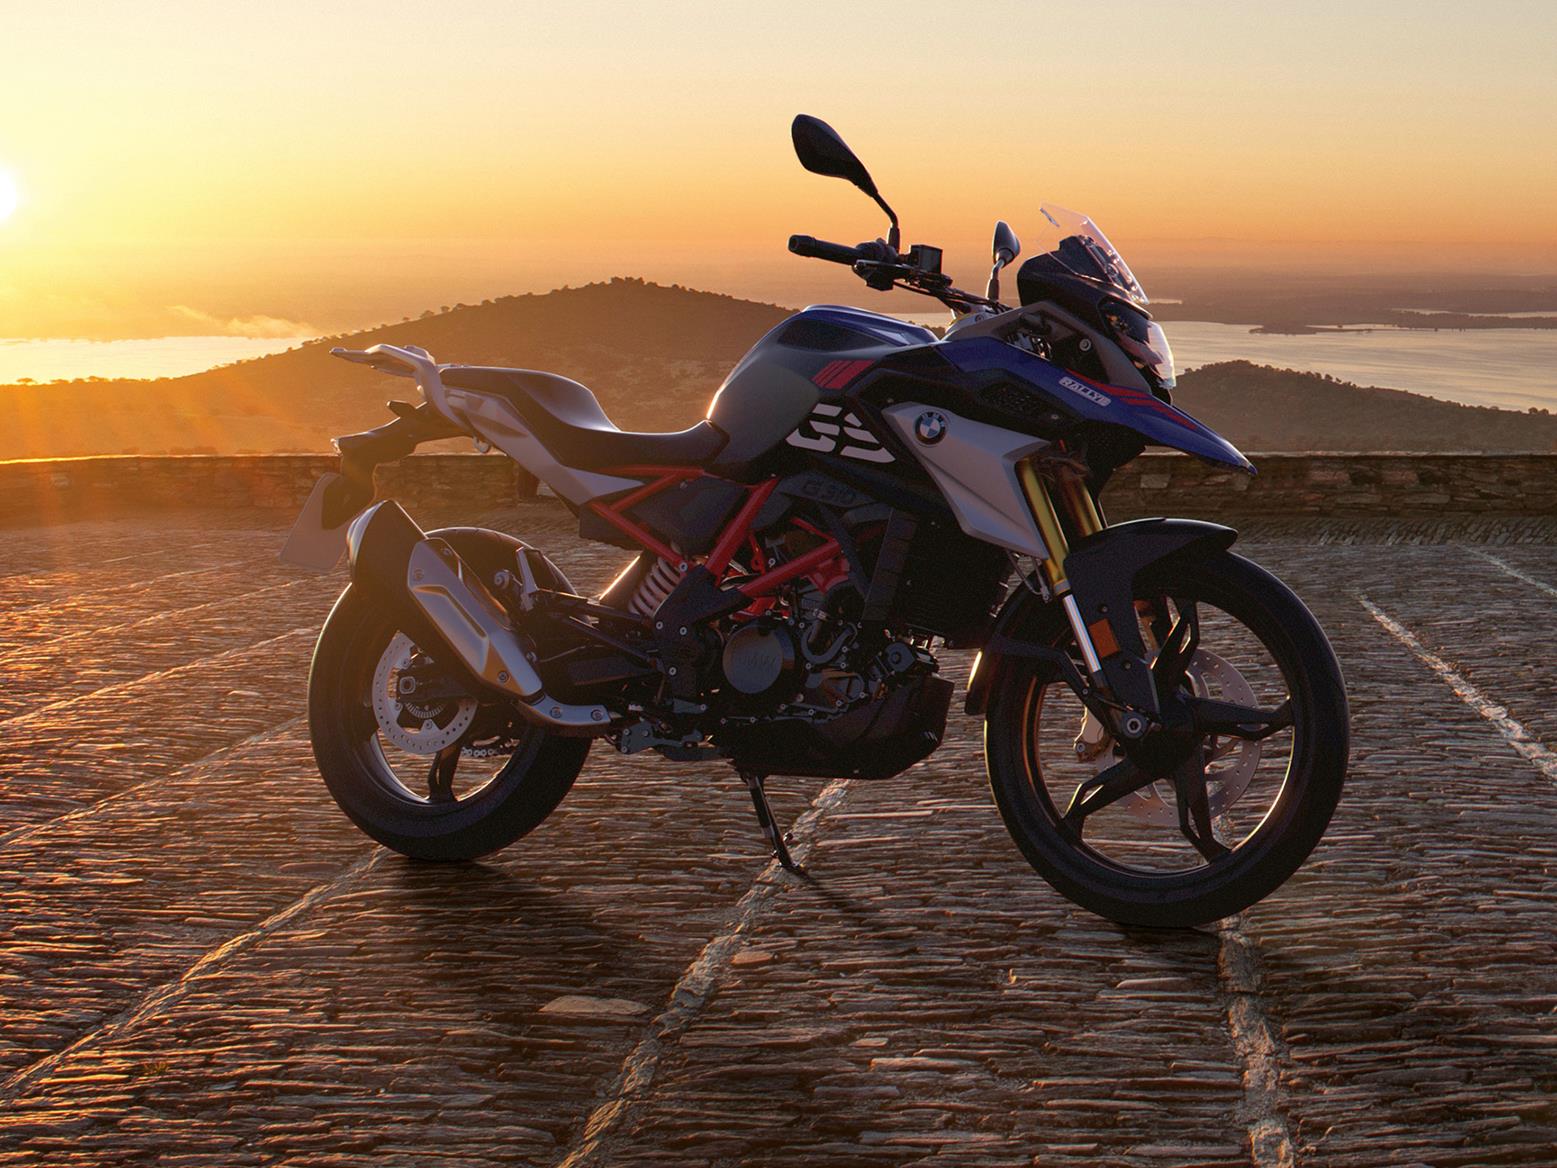 BMW G310GS: Baby of the GS family gets updated